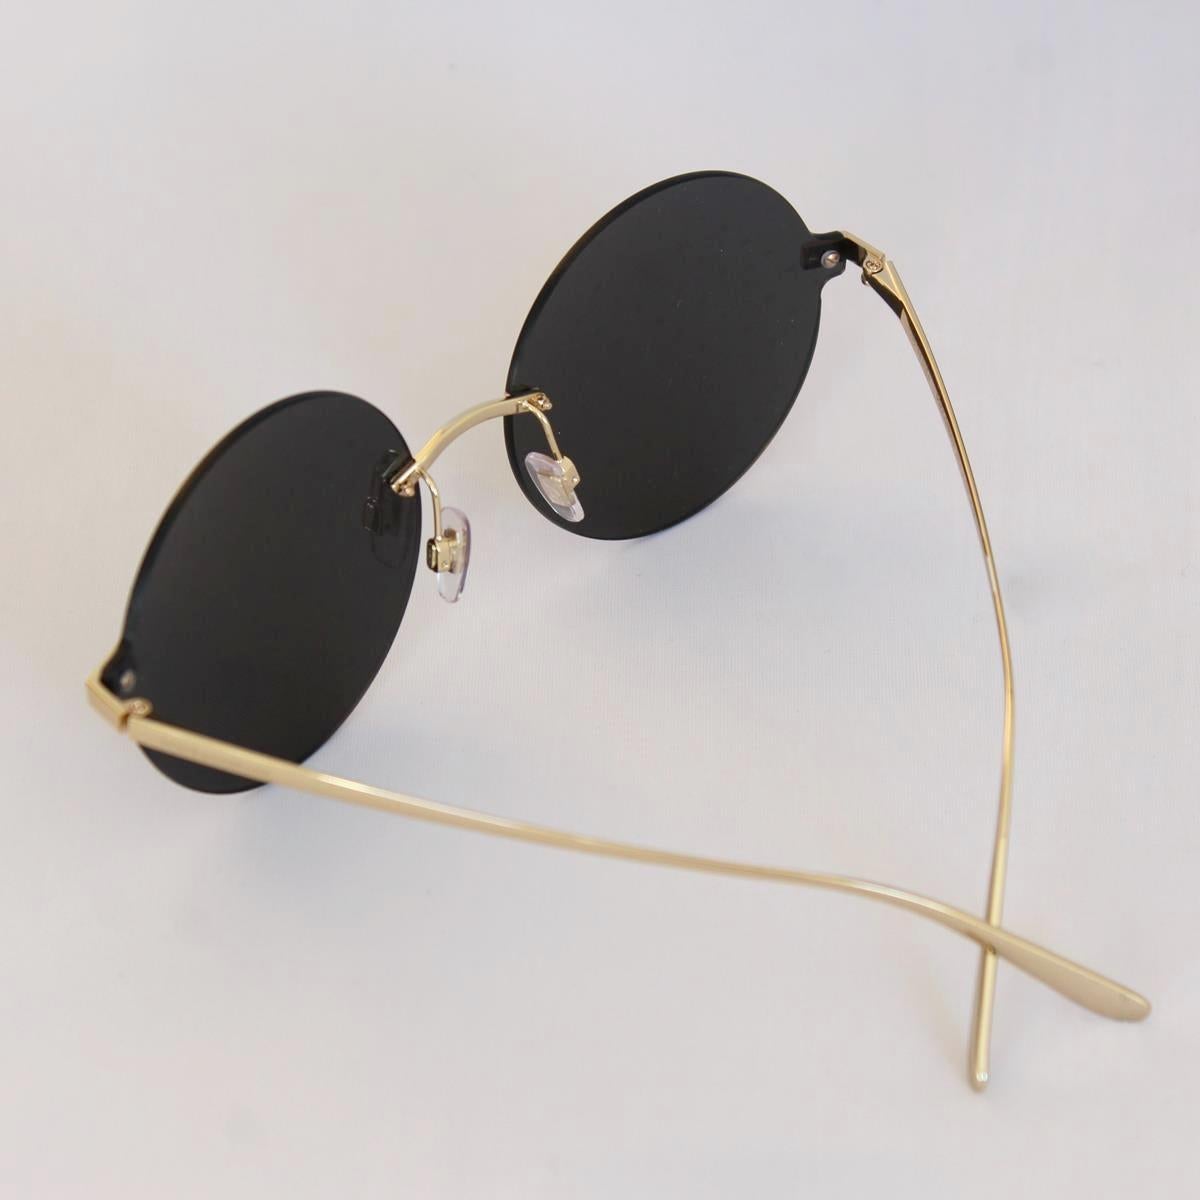 SS 2019
DG 2228
Rimless round sunglasses 
Frame Color: Shiny gold
Temple Color: Shiny gold
Lens Color: Smoke gradient with gold polka dots
Adjustable nosepads
Cm 15 (5.9 inches)
Worldwide express shipping included in the price !